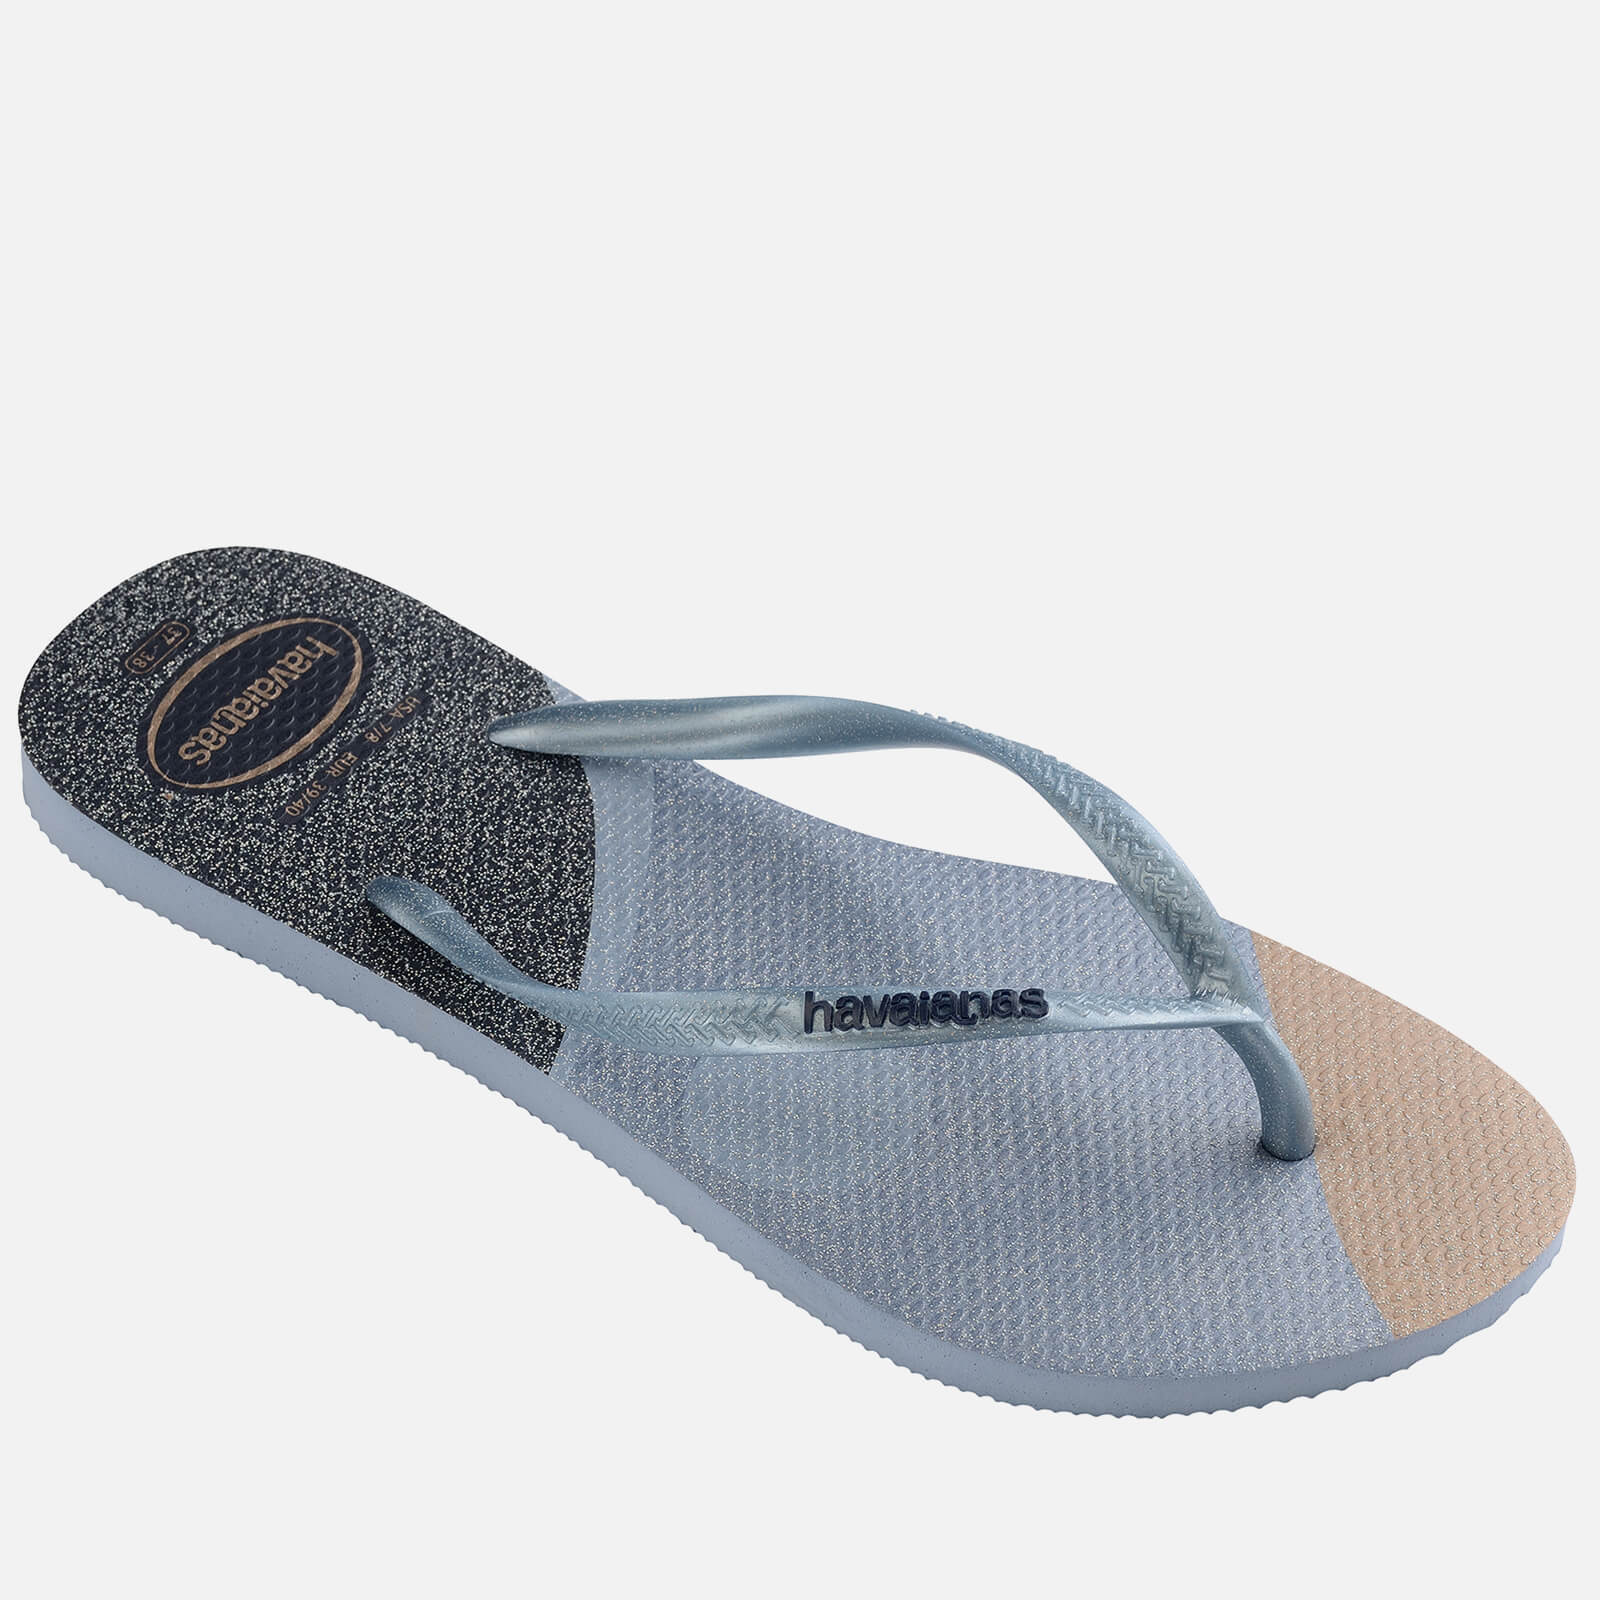 Artikel klicken und genauer betrachten! - A high-summer essential, the Havaianas Palette Glow flip flops flaunt metallic blue straps and multicoloured rubber soles that offer optimum comfort and poolside grip. Pair yours with everything from jeans to dresses and swimwear throughout the warmer seasons. | im Online Shop kaufen